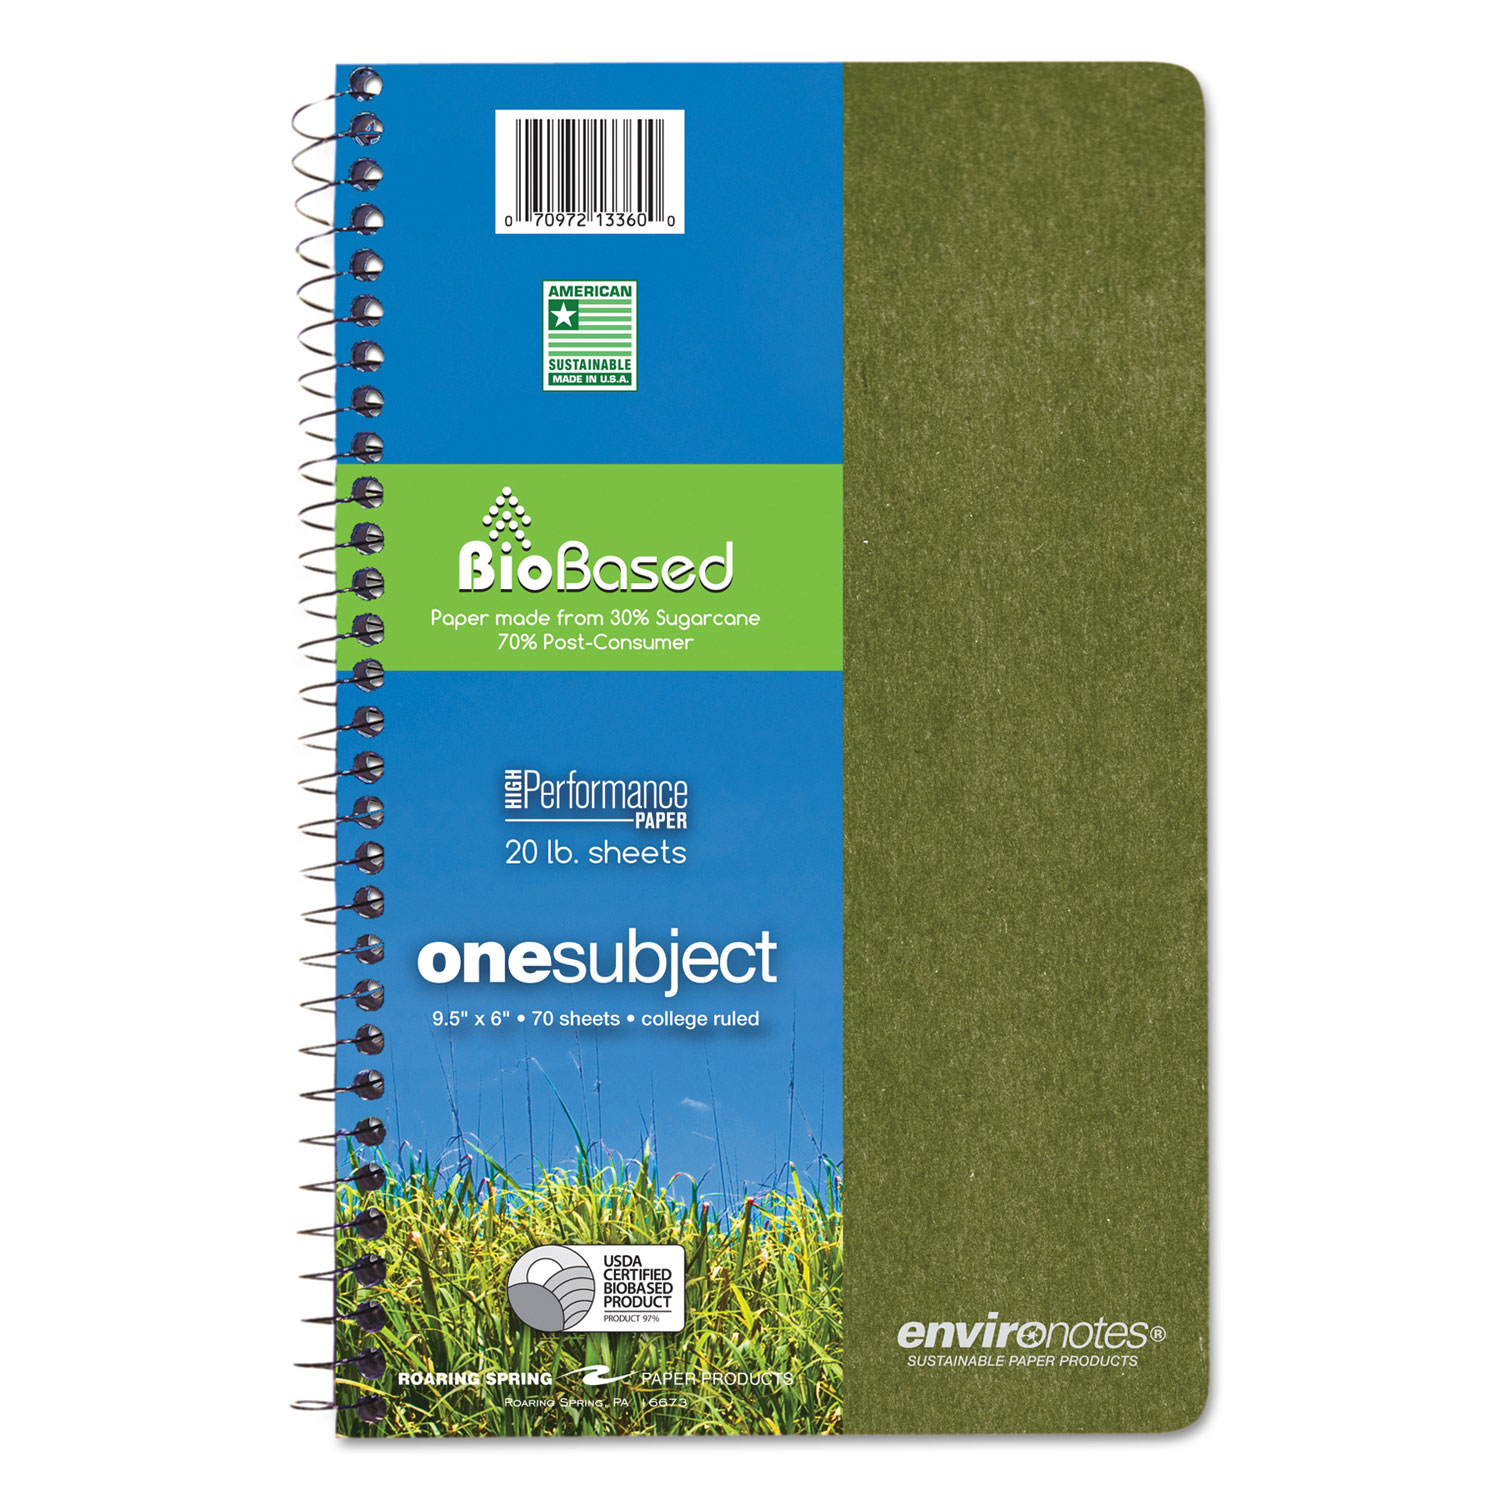  Roaring Spring 13360 Environotes BioBased Notebook, 1 Subject, Medium/College Rule, Assorted Earthtones Covers, 9.5 x 6, 70 Sheets (ROA13360) 